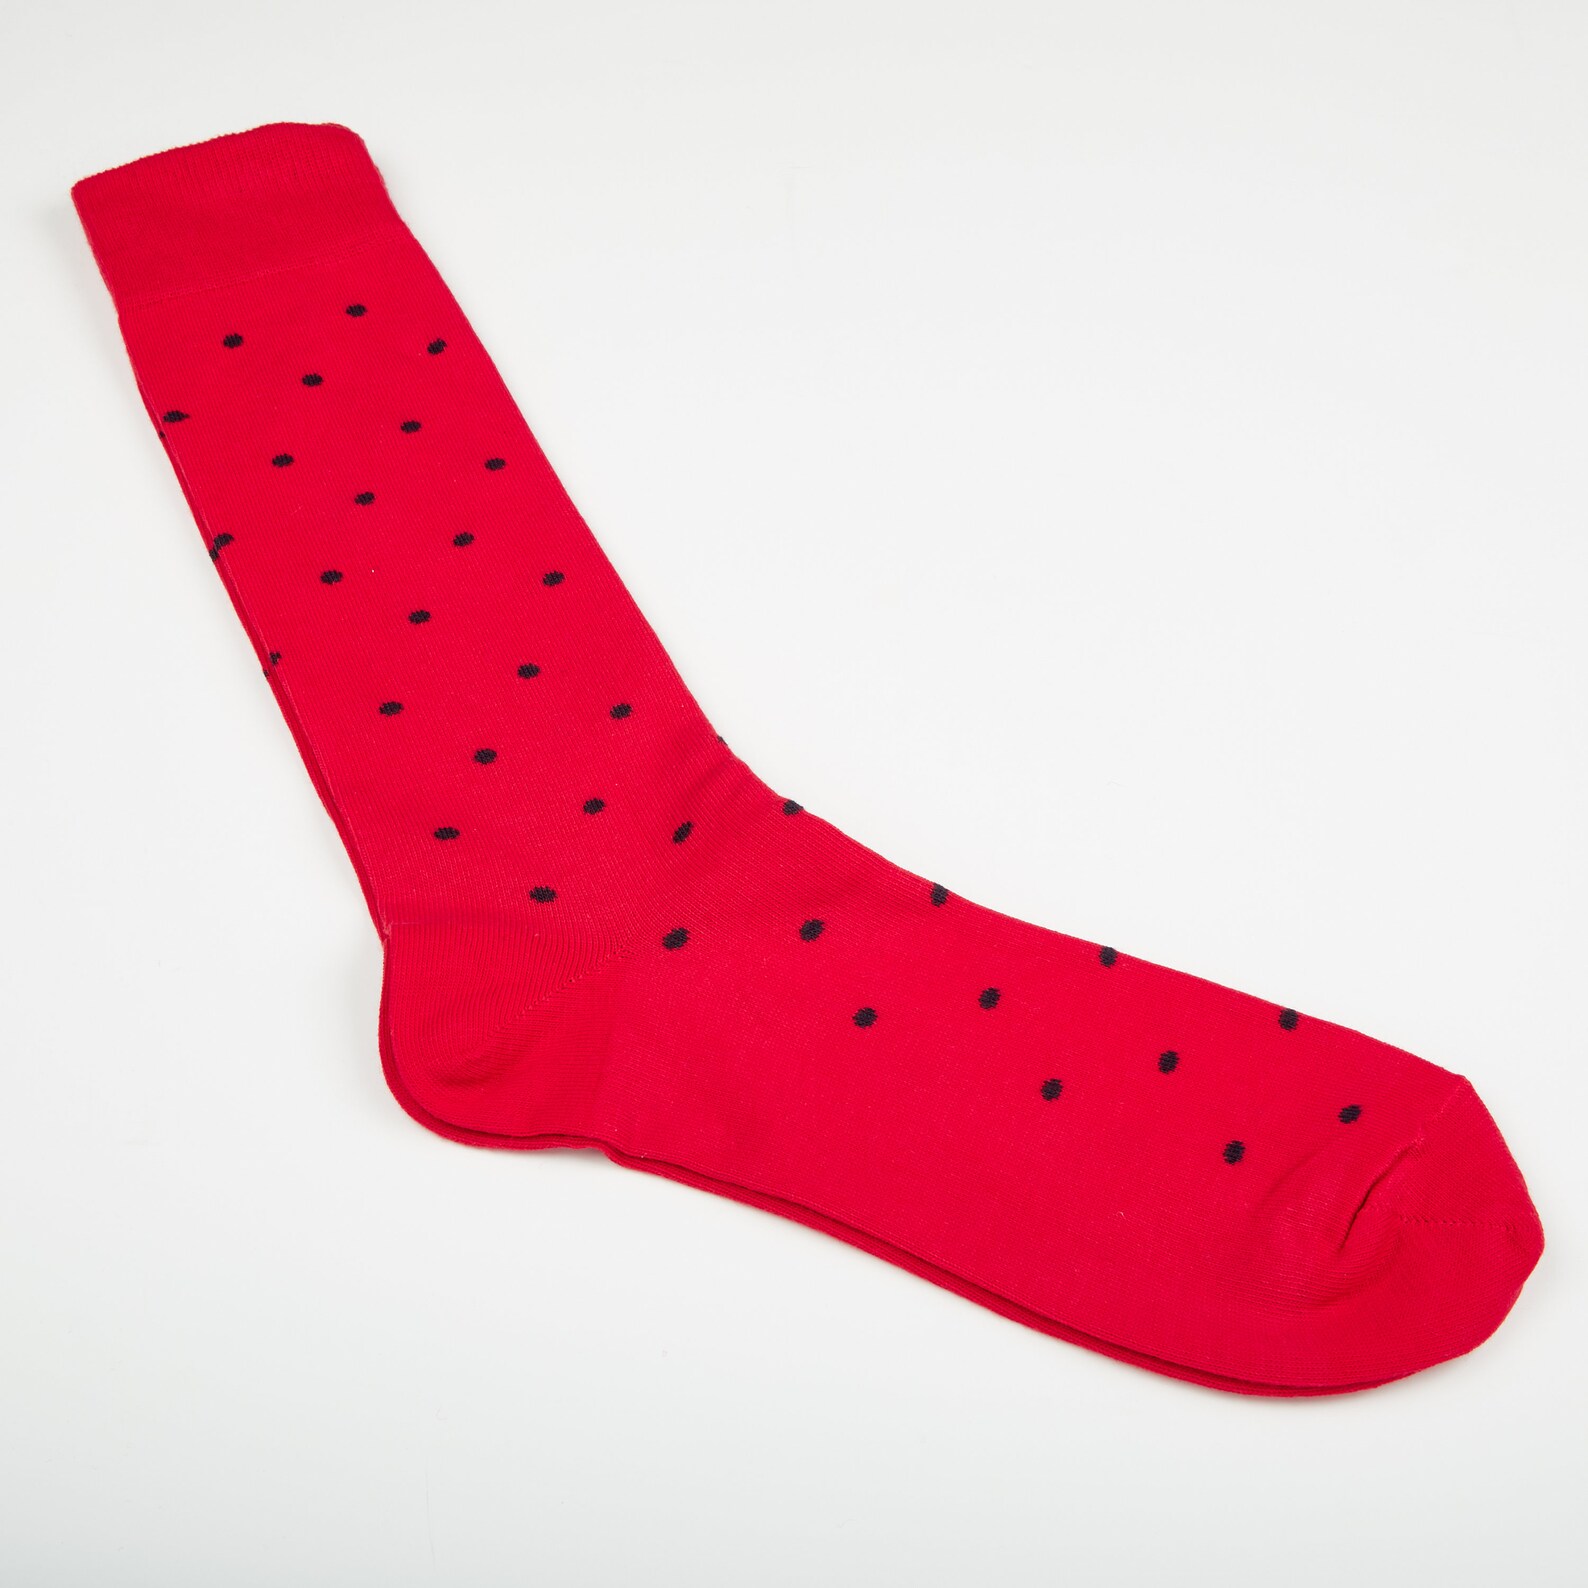 Mens Red and Black Polkadot Cotton Socks One Size - Etsy